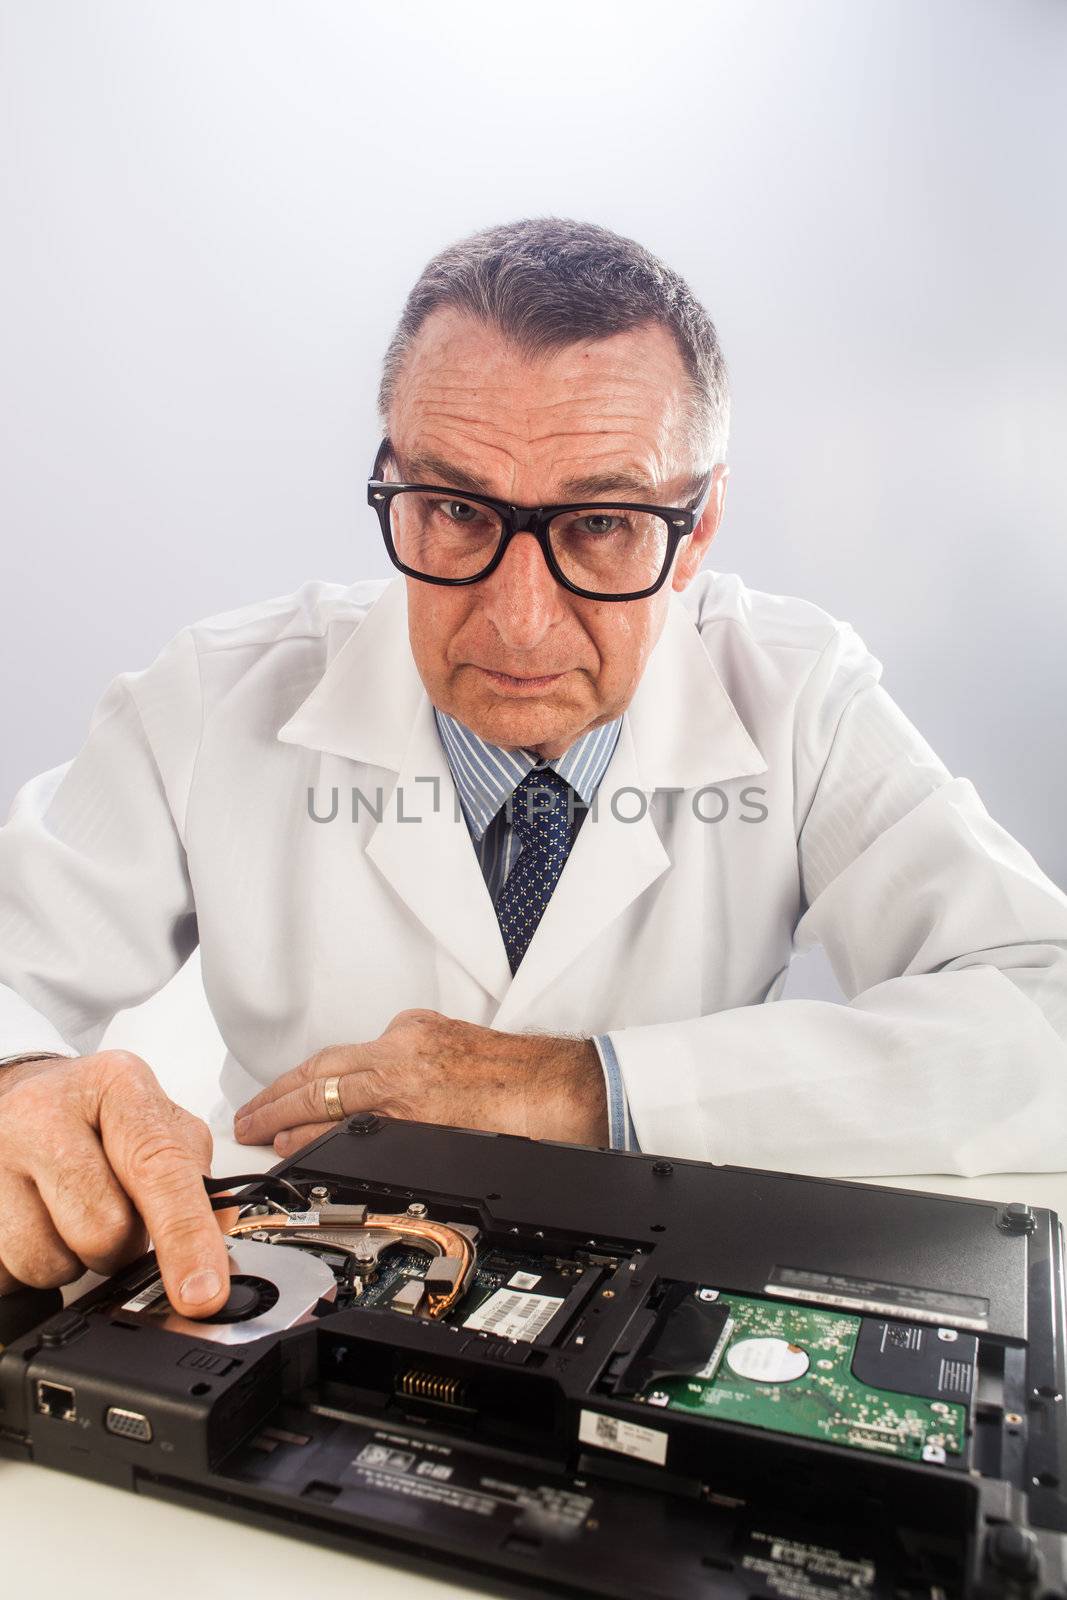 An older male wearing a white lab coat and reaparing electronic equipments, like a technician or a repair man.